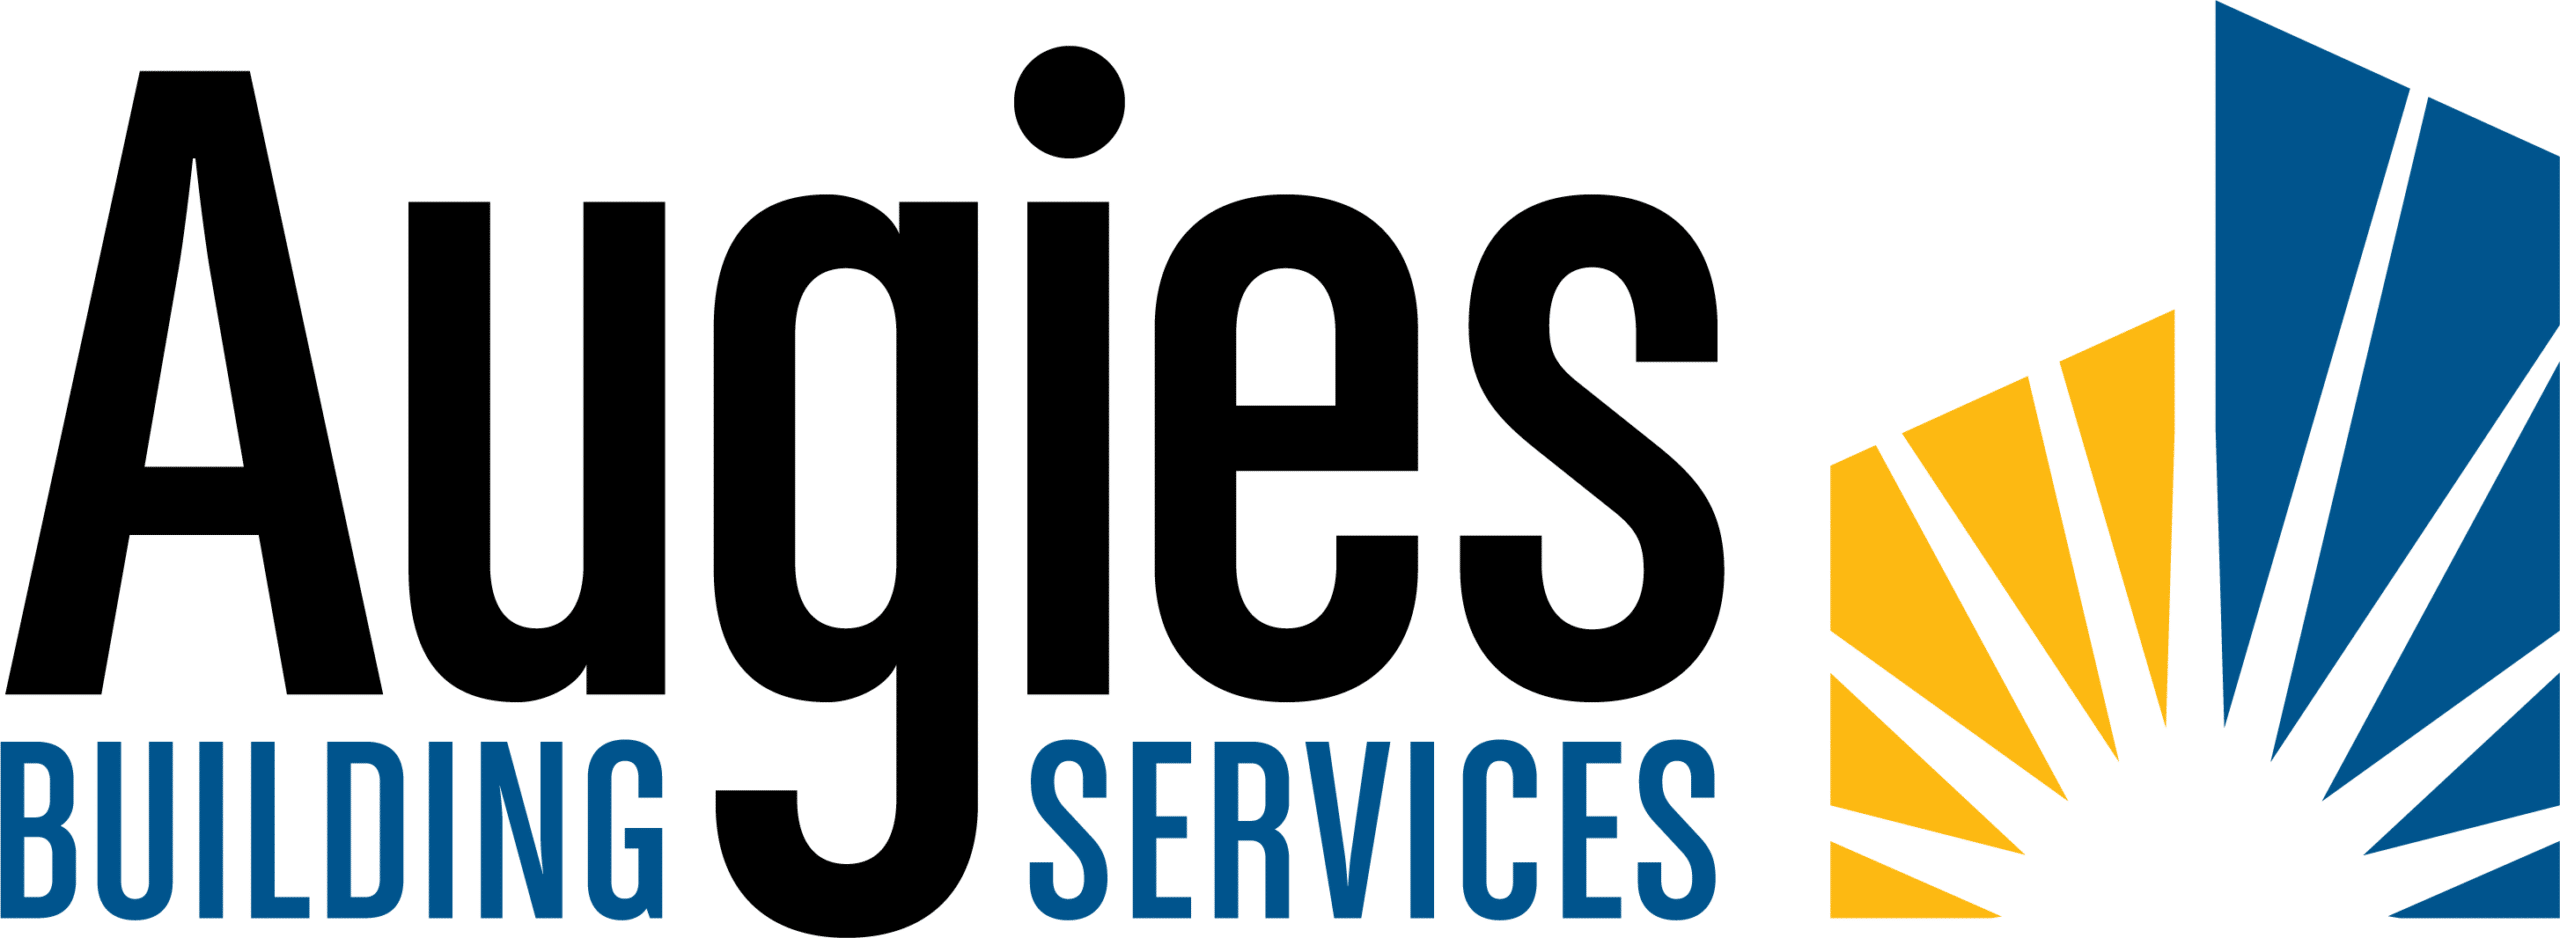 sponsors test - Christian Business Round Table | Augies Janitorial Services : 